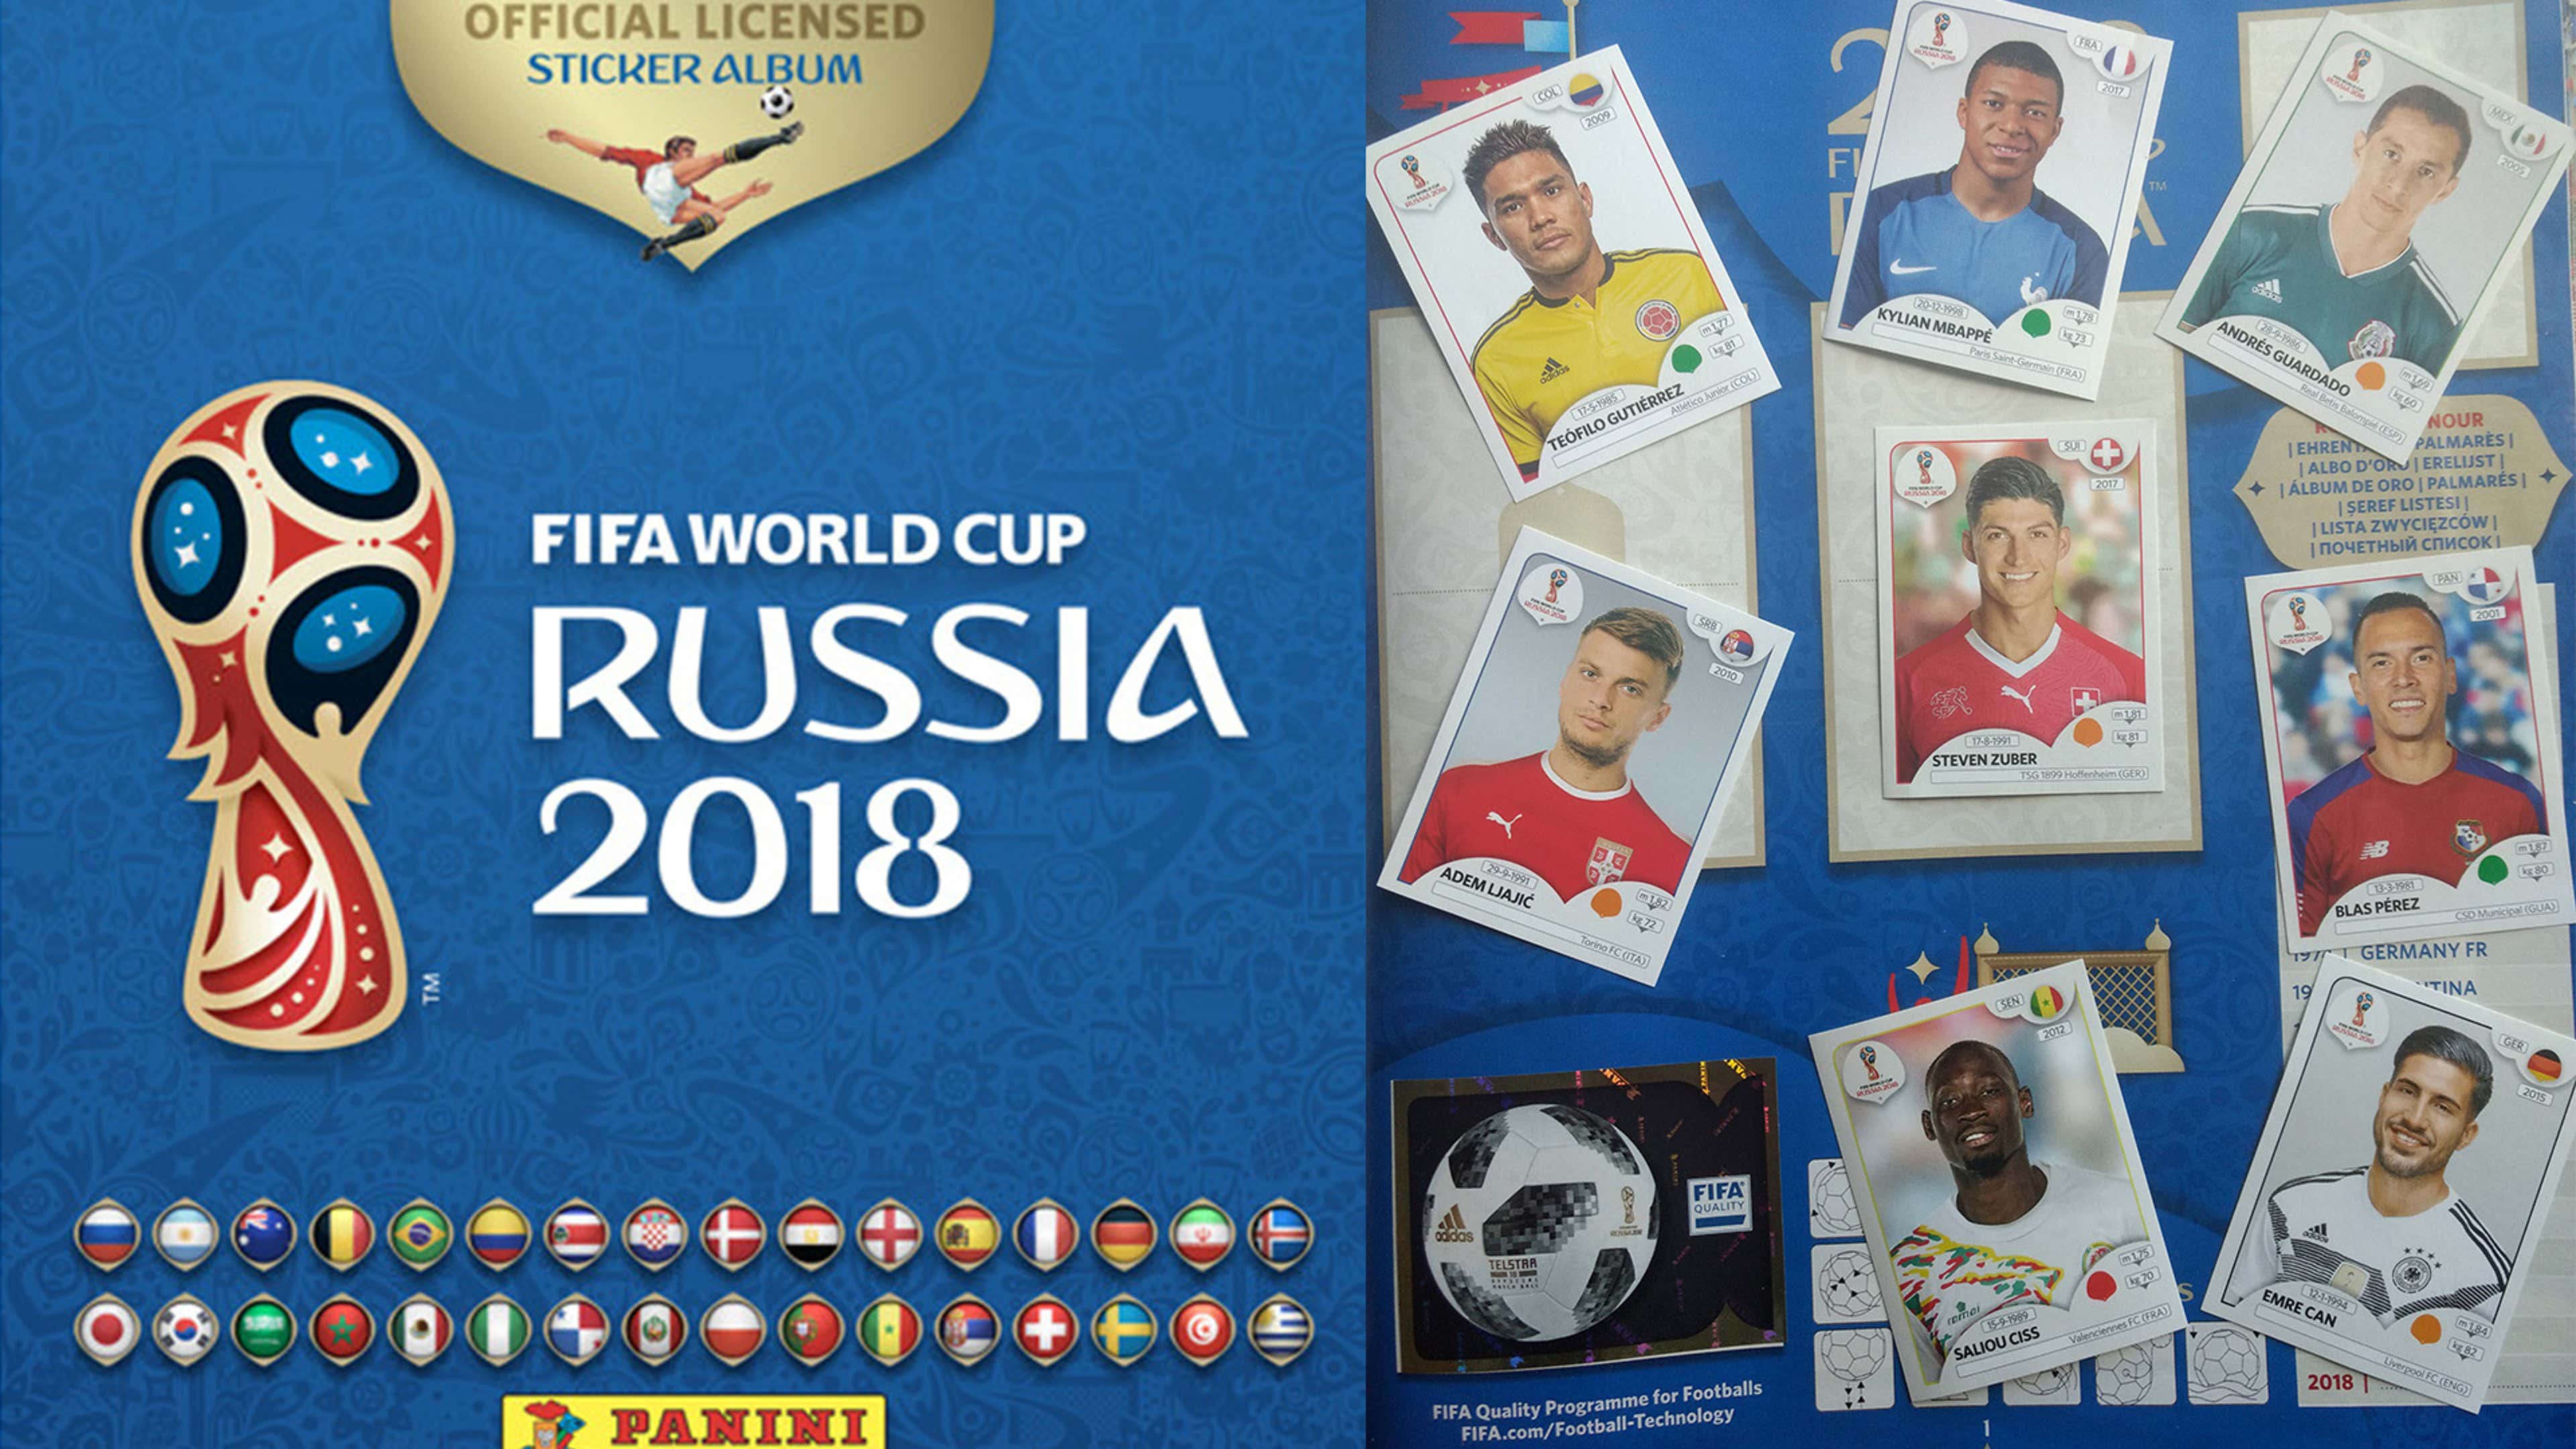 2018 FIFA World Cup Russia™ The Official Book (Y)